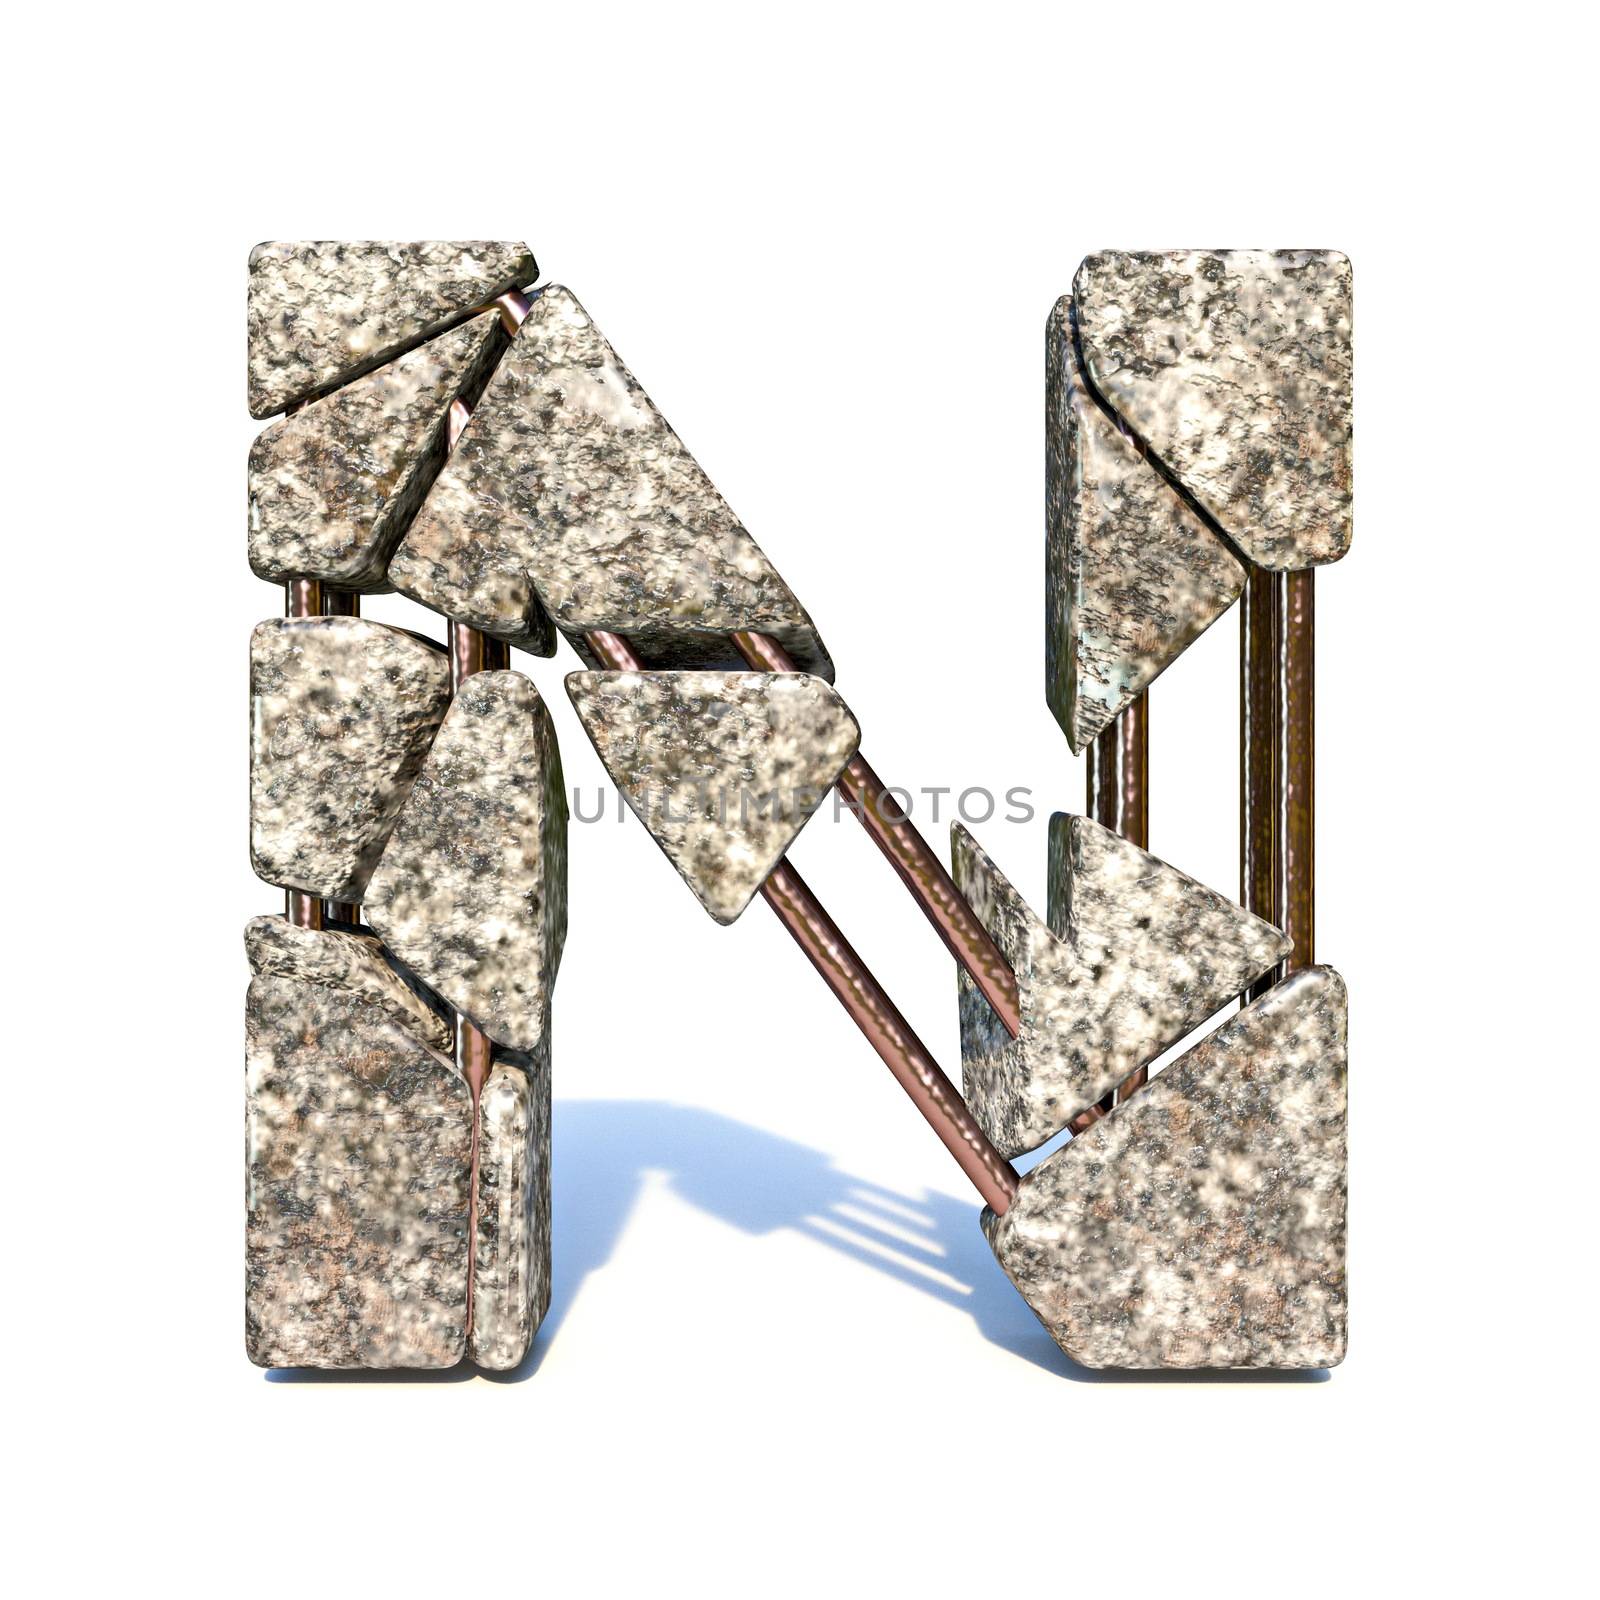 Concrete fracture font Letter N 3D render illustration isolated on white background